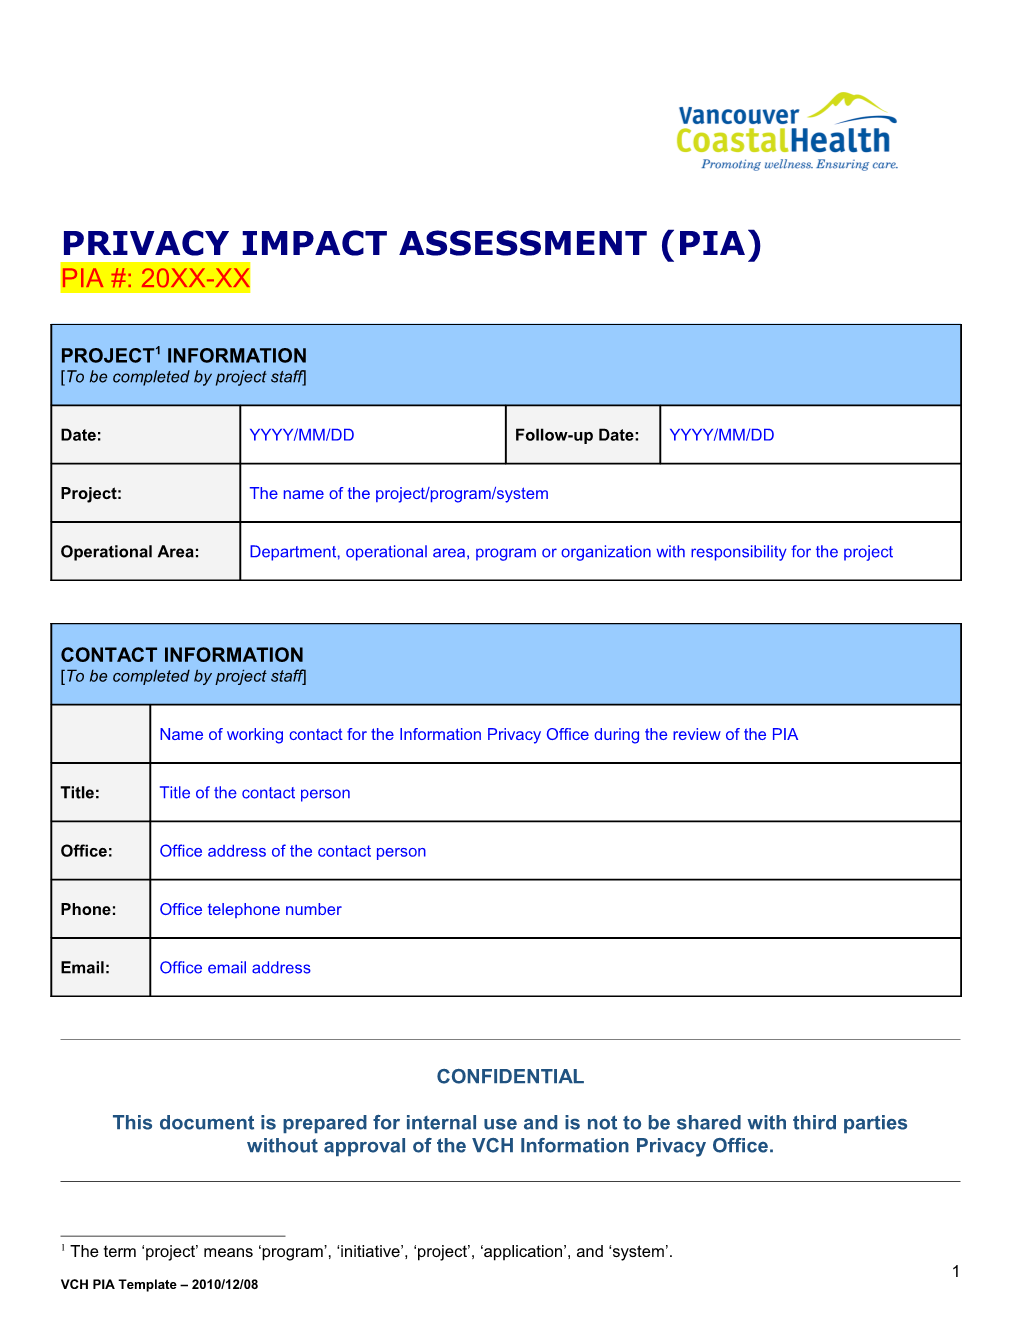 Privacy Compliance Checklist for System Interface Projects